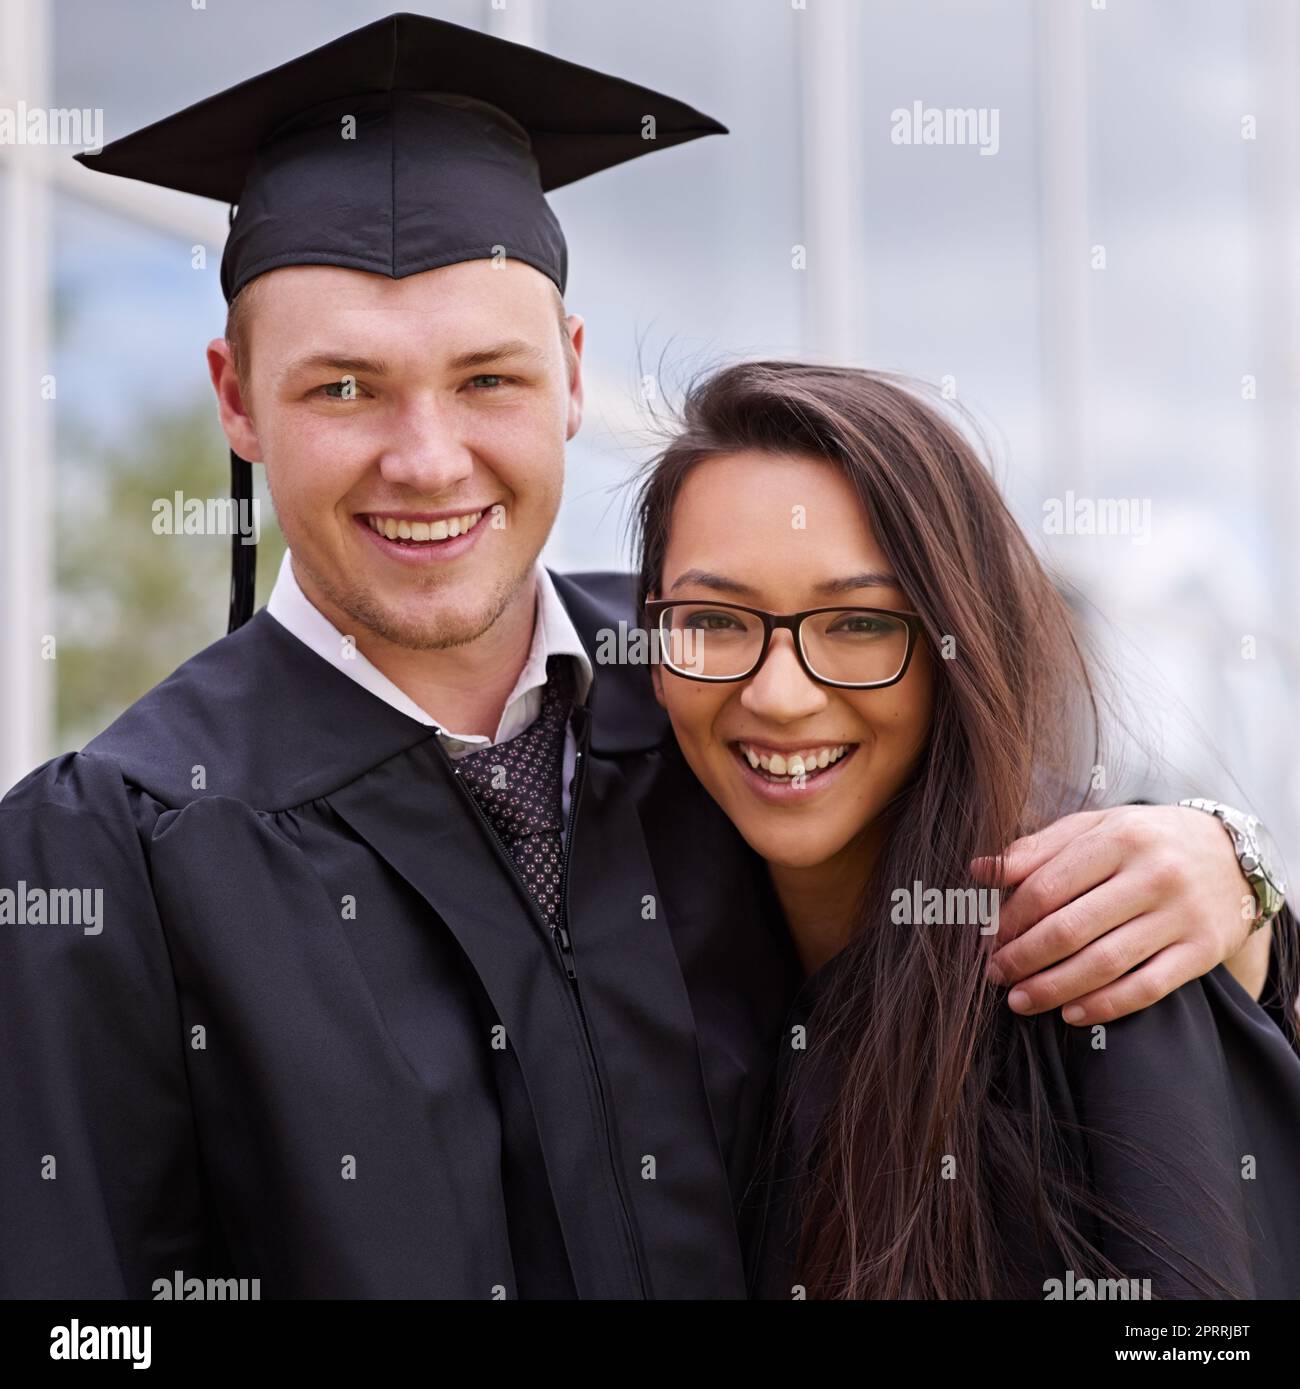 Diplomas achieved and friends made. Portrait of smiling friends on graduation day. Stock Photo